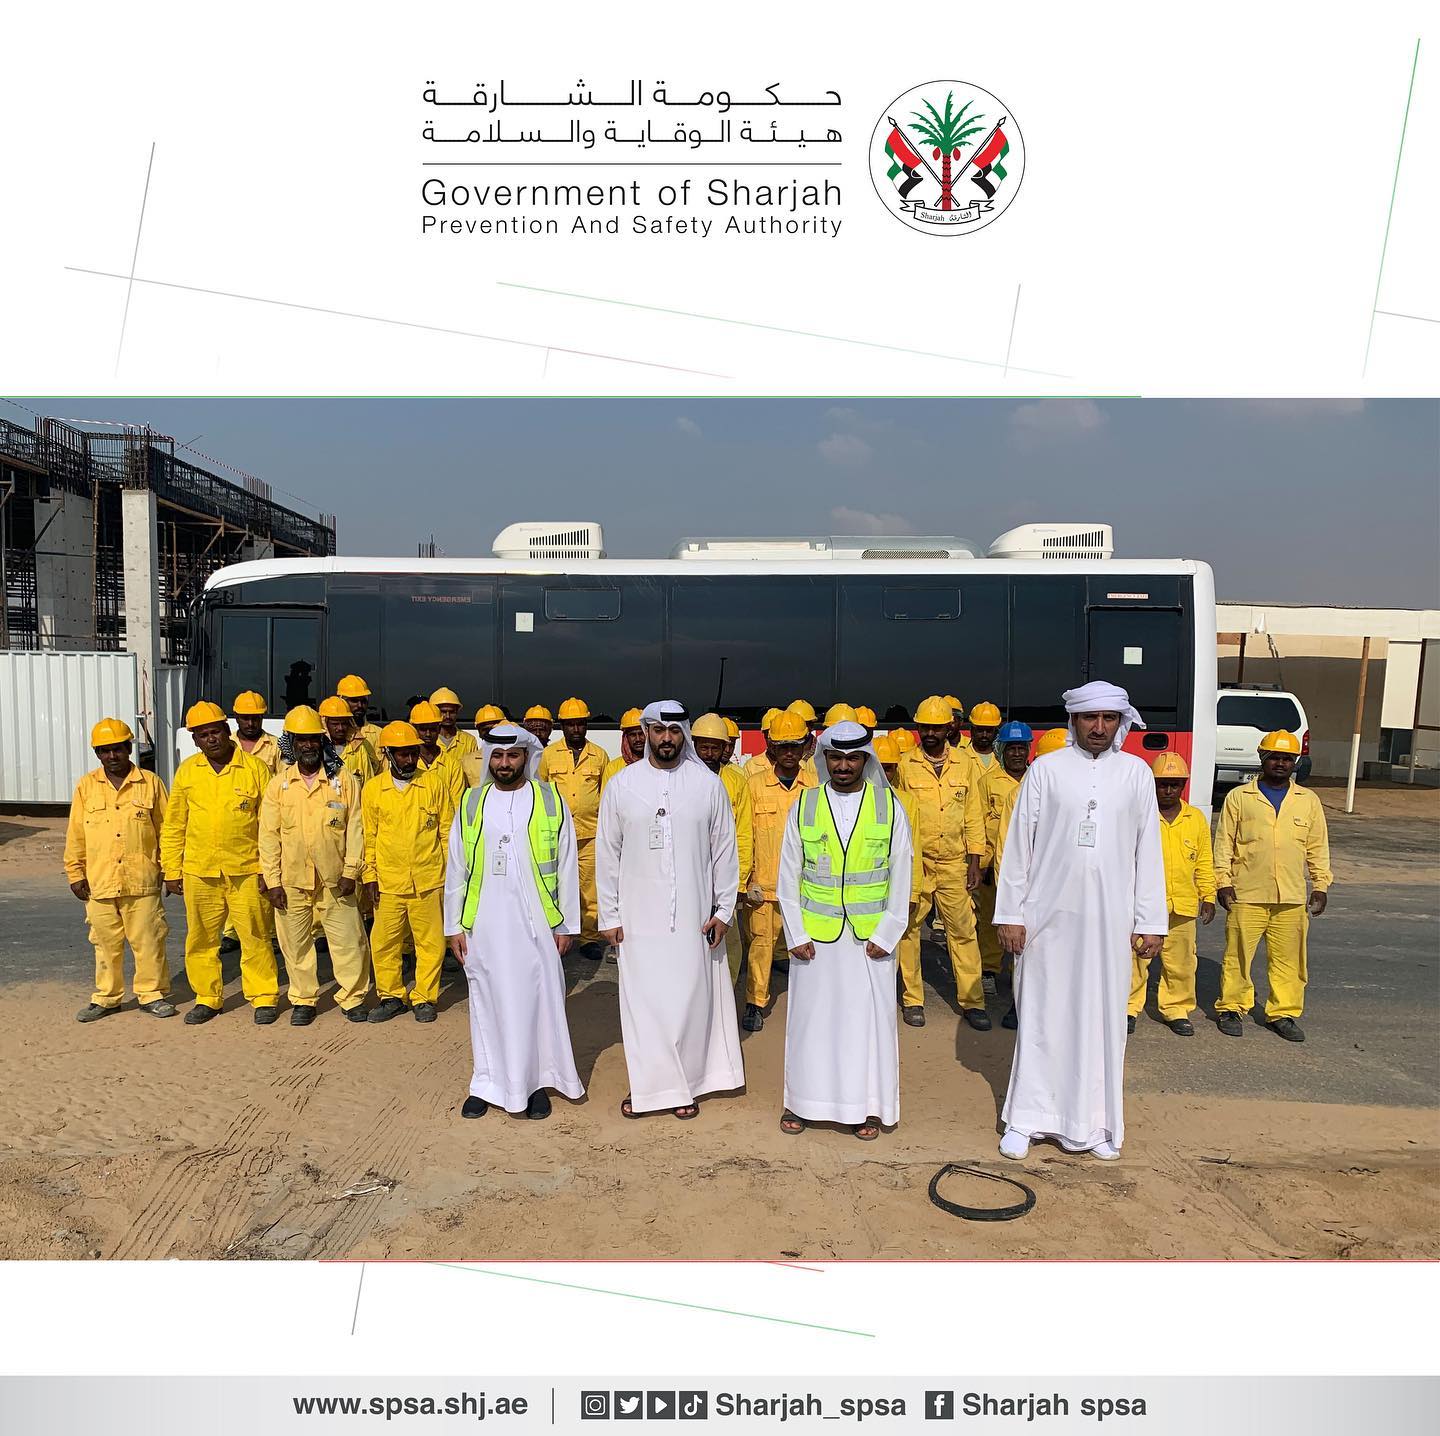 The Prevention and Safety Authority visited a number of construction sites in the Emirate of Sharjah